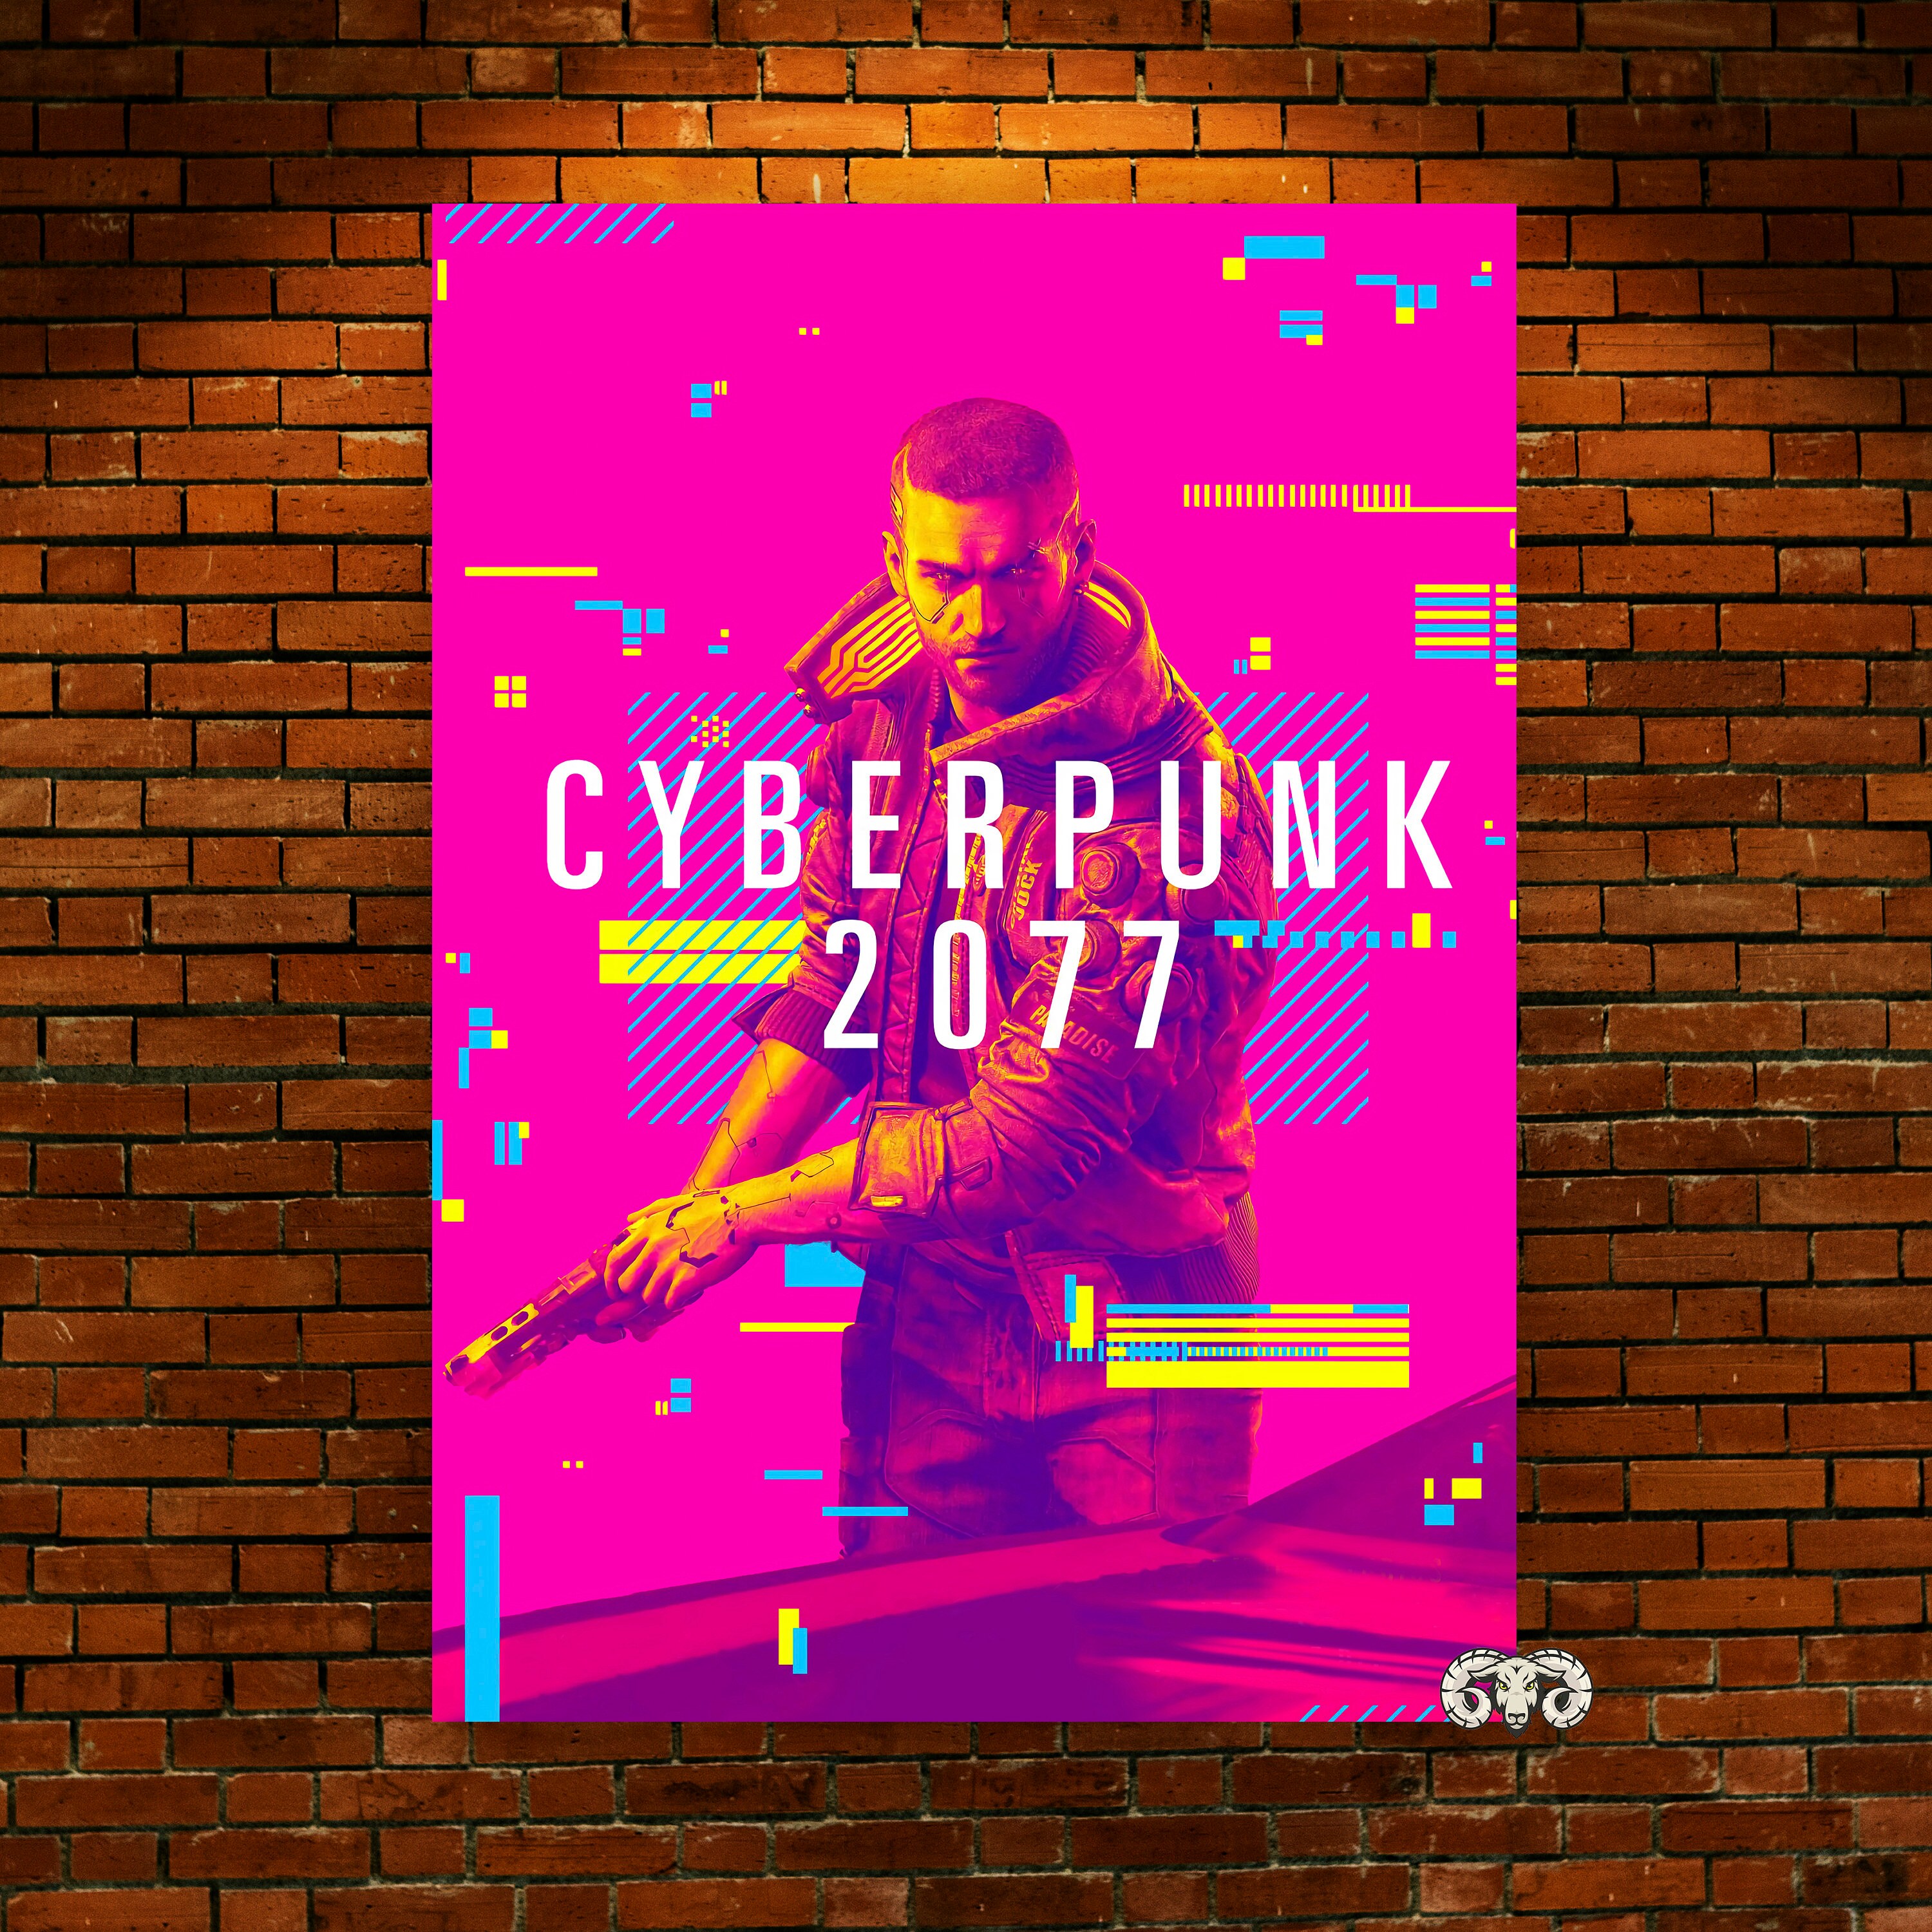  Cyberpunk Edgerunners Poster, Cyberpunk Edgerunners Anime  Poster, Japanese Anime Cyberpunk Edgerunner Poster, Lucy Poster, Trendy  Style Art Print Photo Collection, Lucy Anime Poster Art Modern Wall Art  Print Family Bedroom Decor